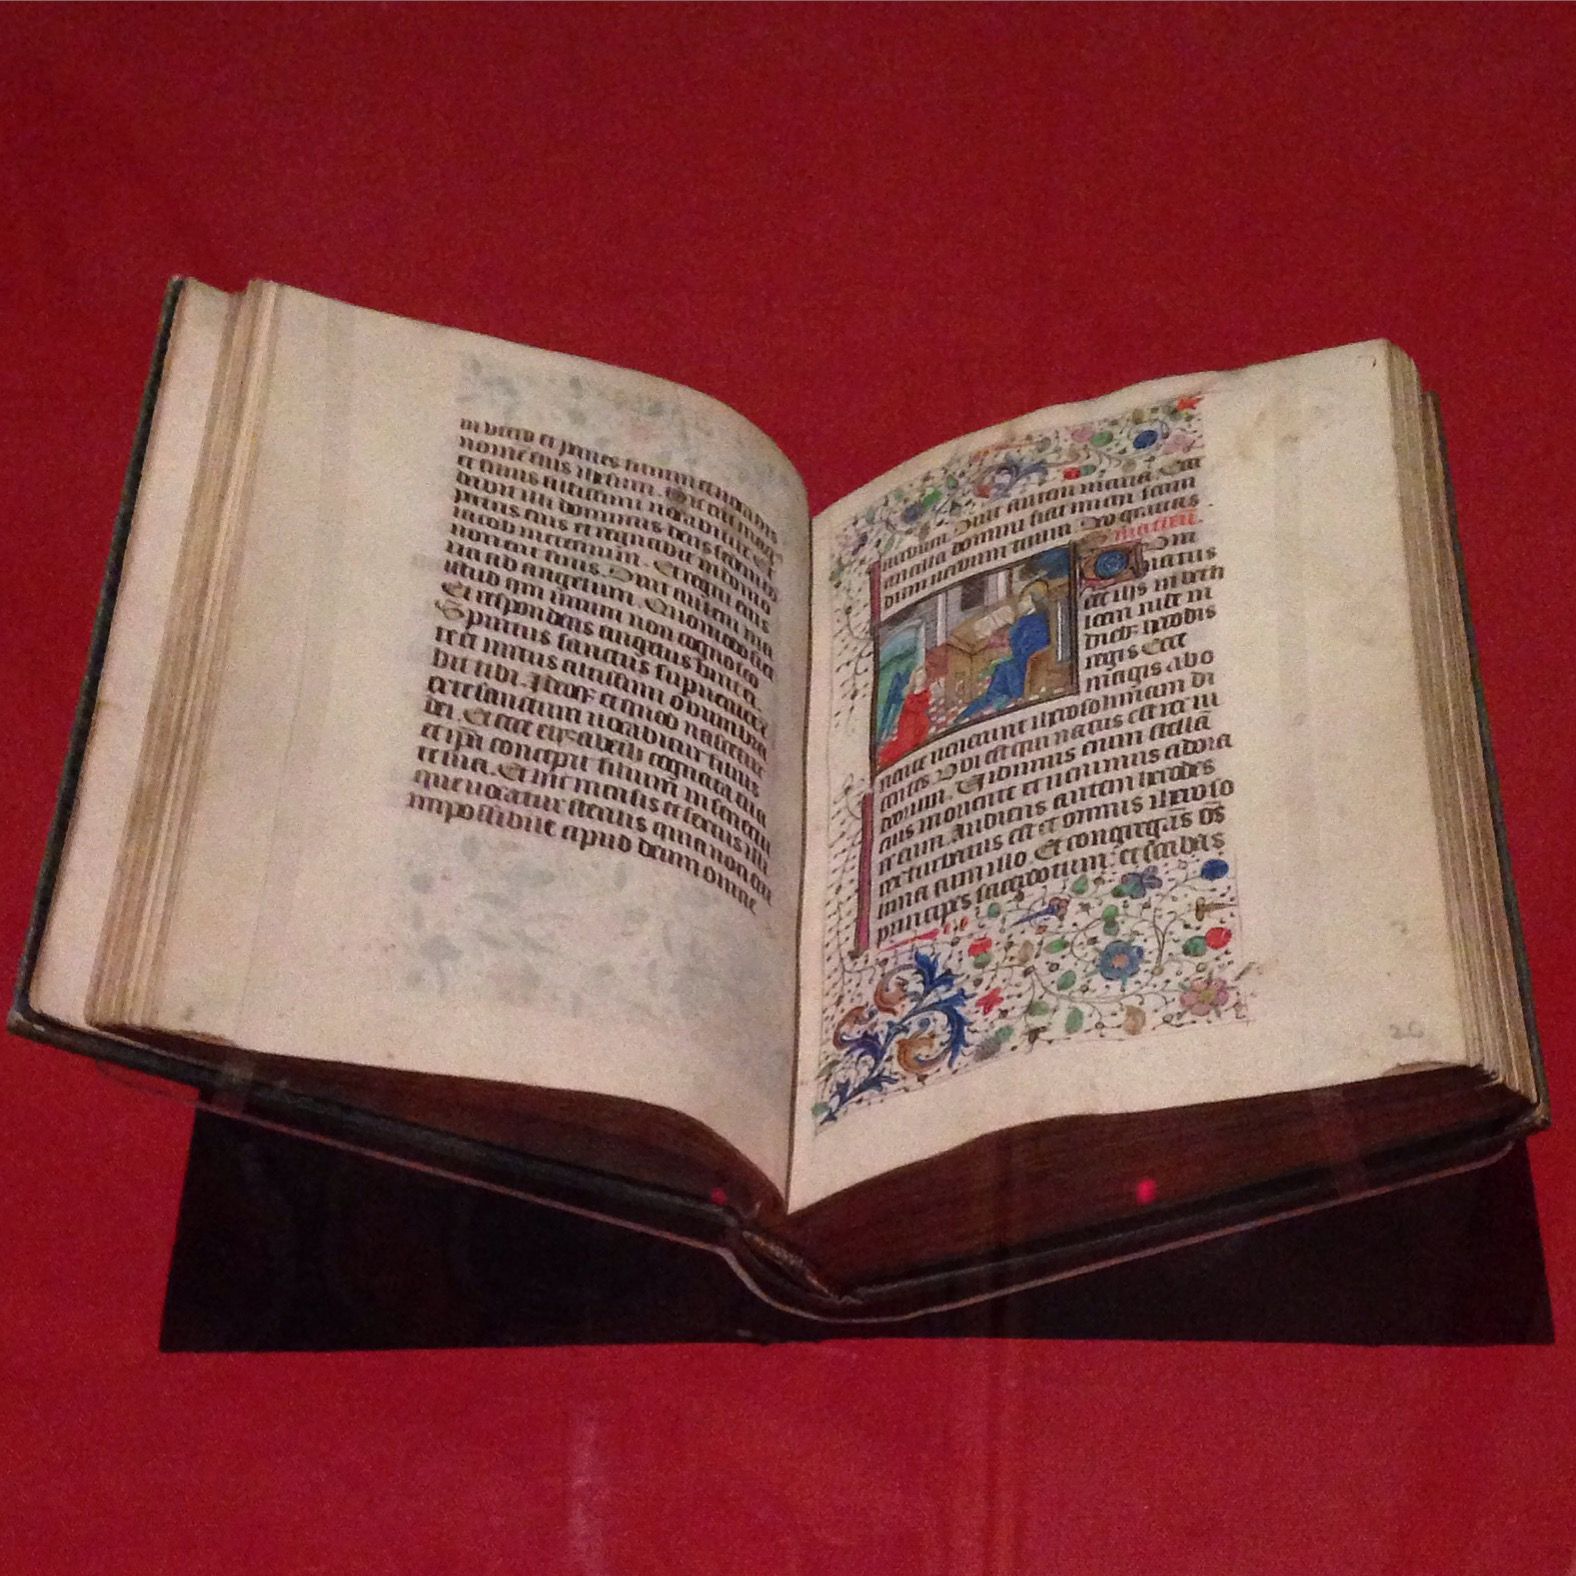 A devotional book from the 15th century on display at the Trinity College Library in Dublin, Ireland. The illustration depicts St. Matthew at his desk.